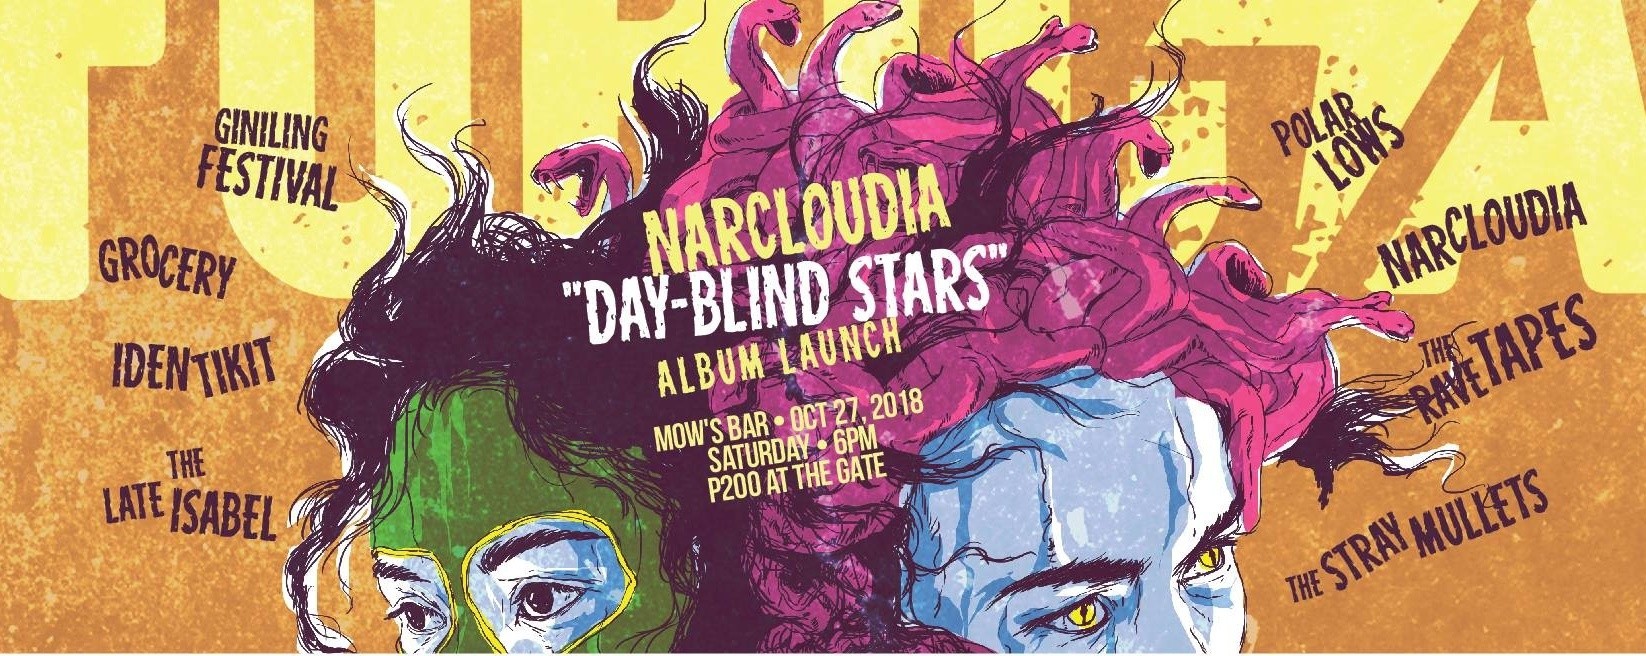 Narcloudia "Day-Blind Stars" Album Launch Party